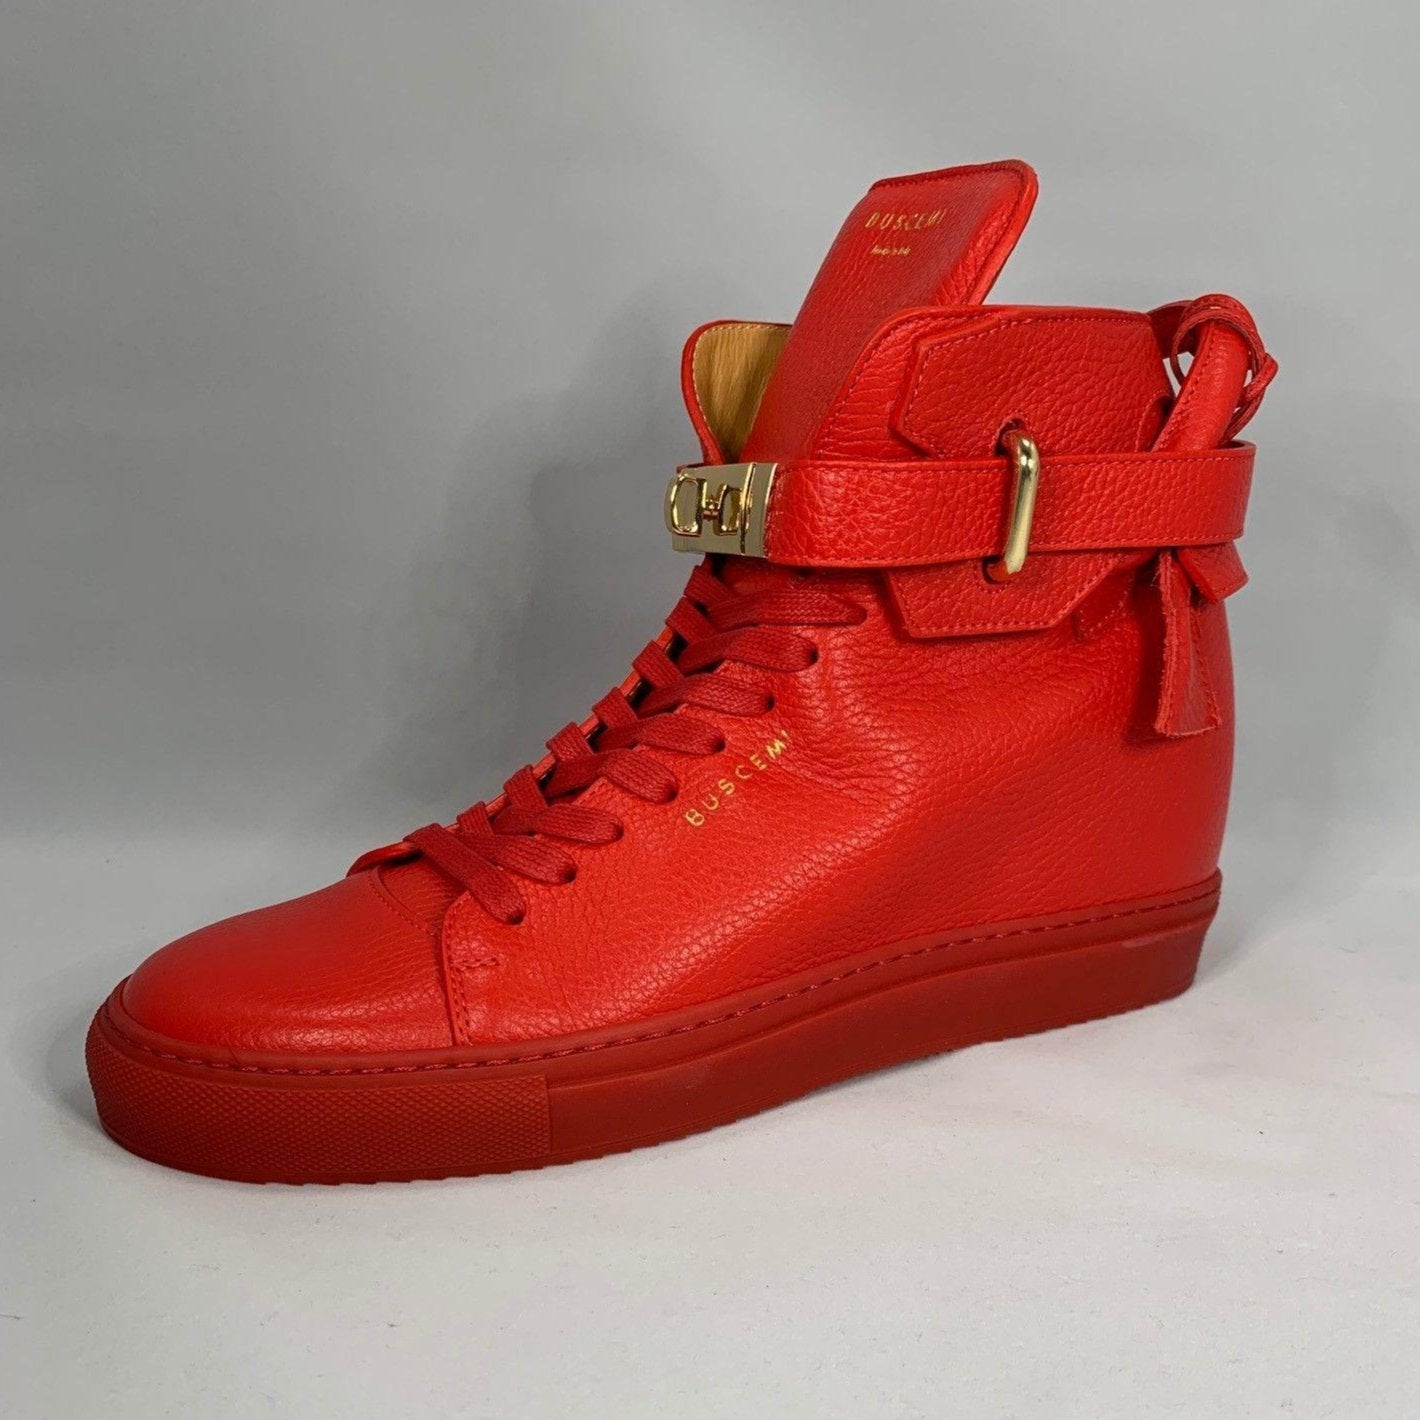 Buscemi Womens 100MM Alce Red High Top Sneakers - Positivo Clothing